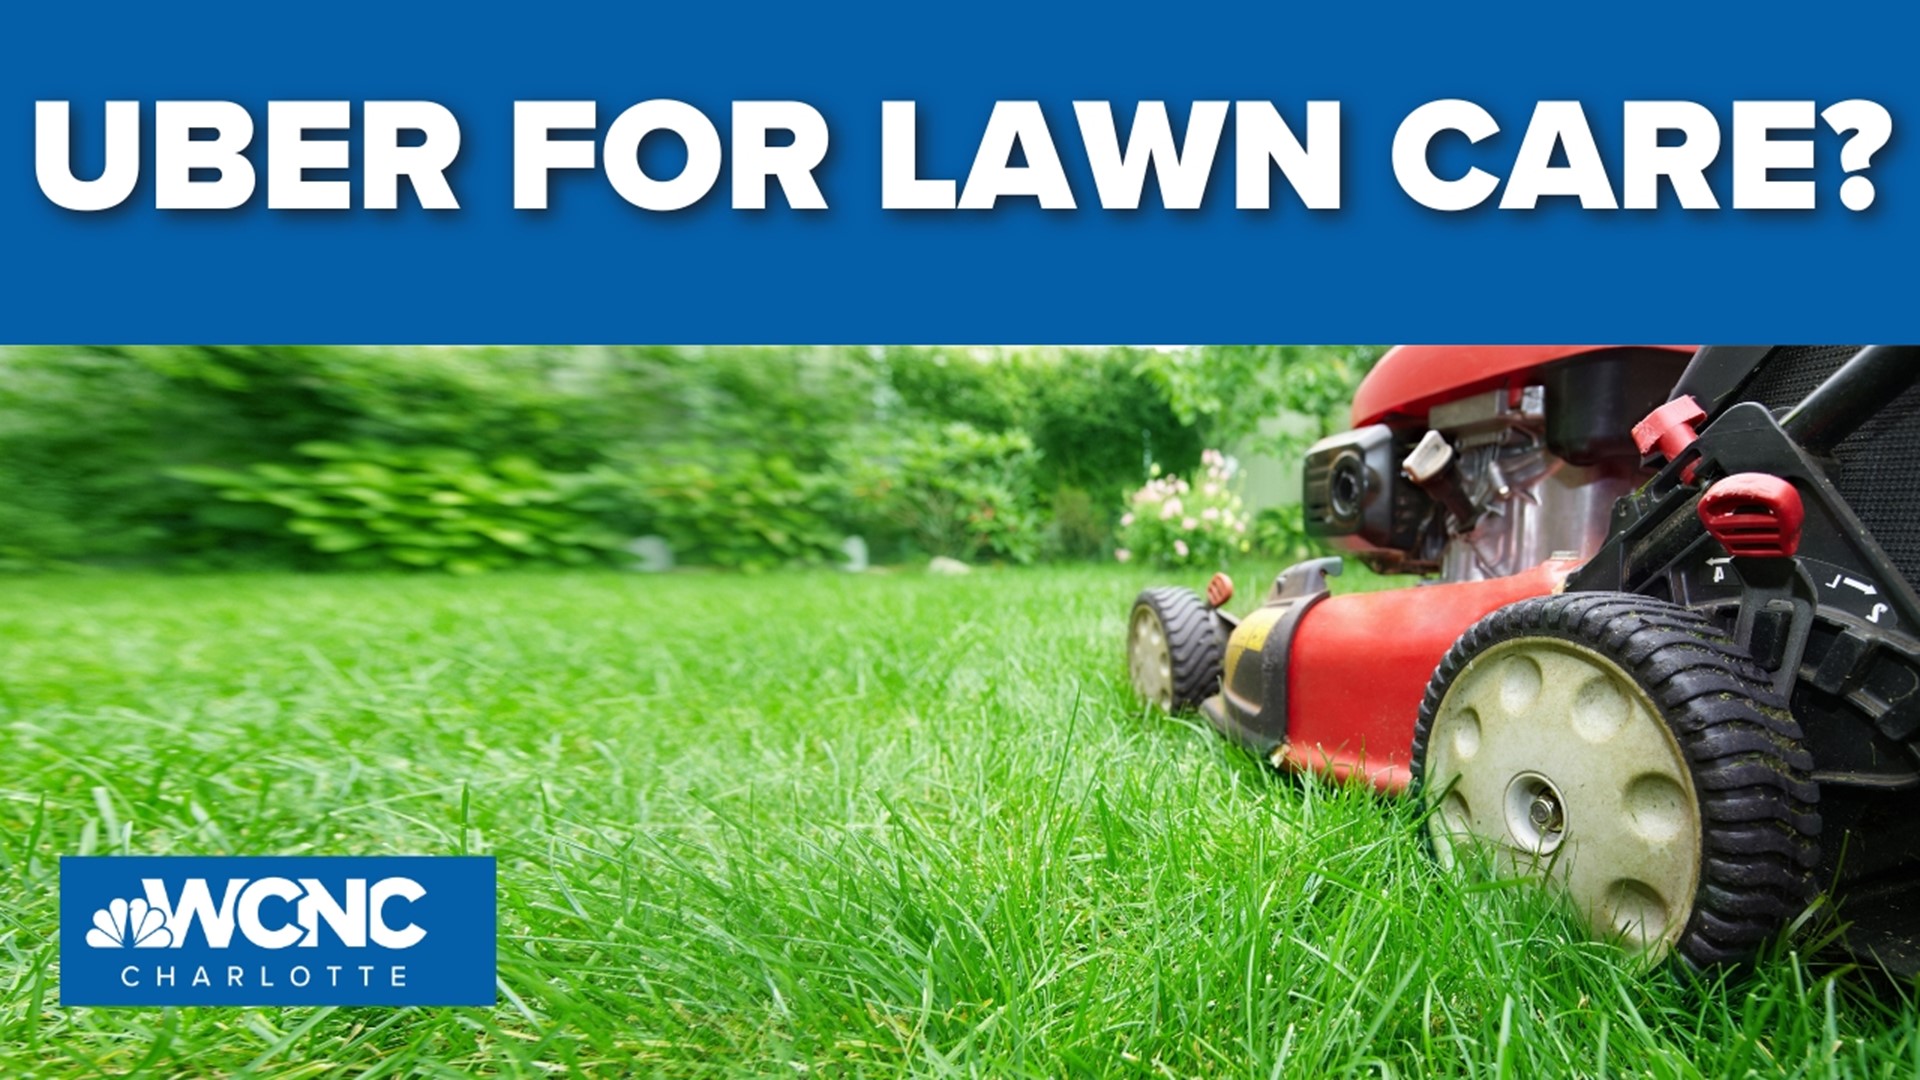 Uber-like app is now up and running to get lawn care without a commitment.